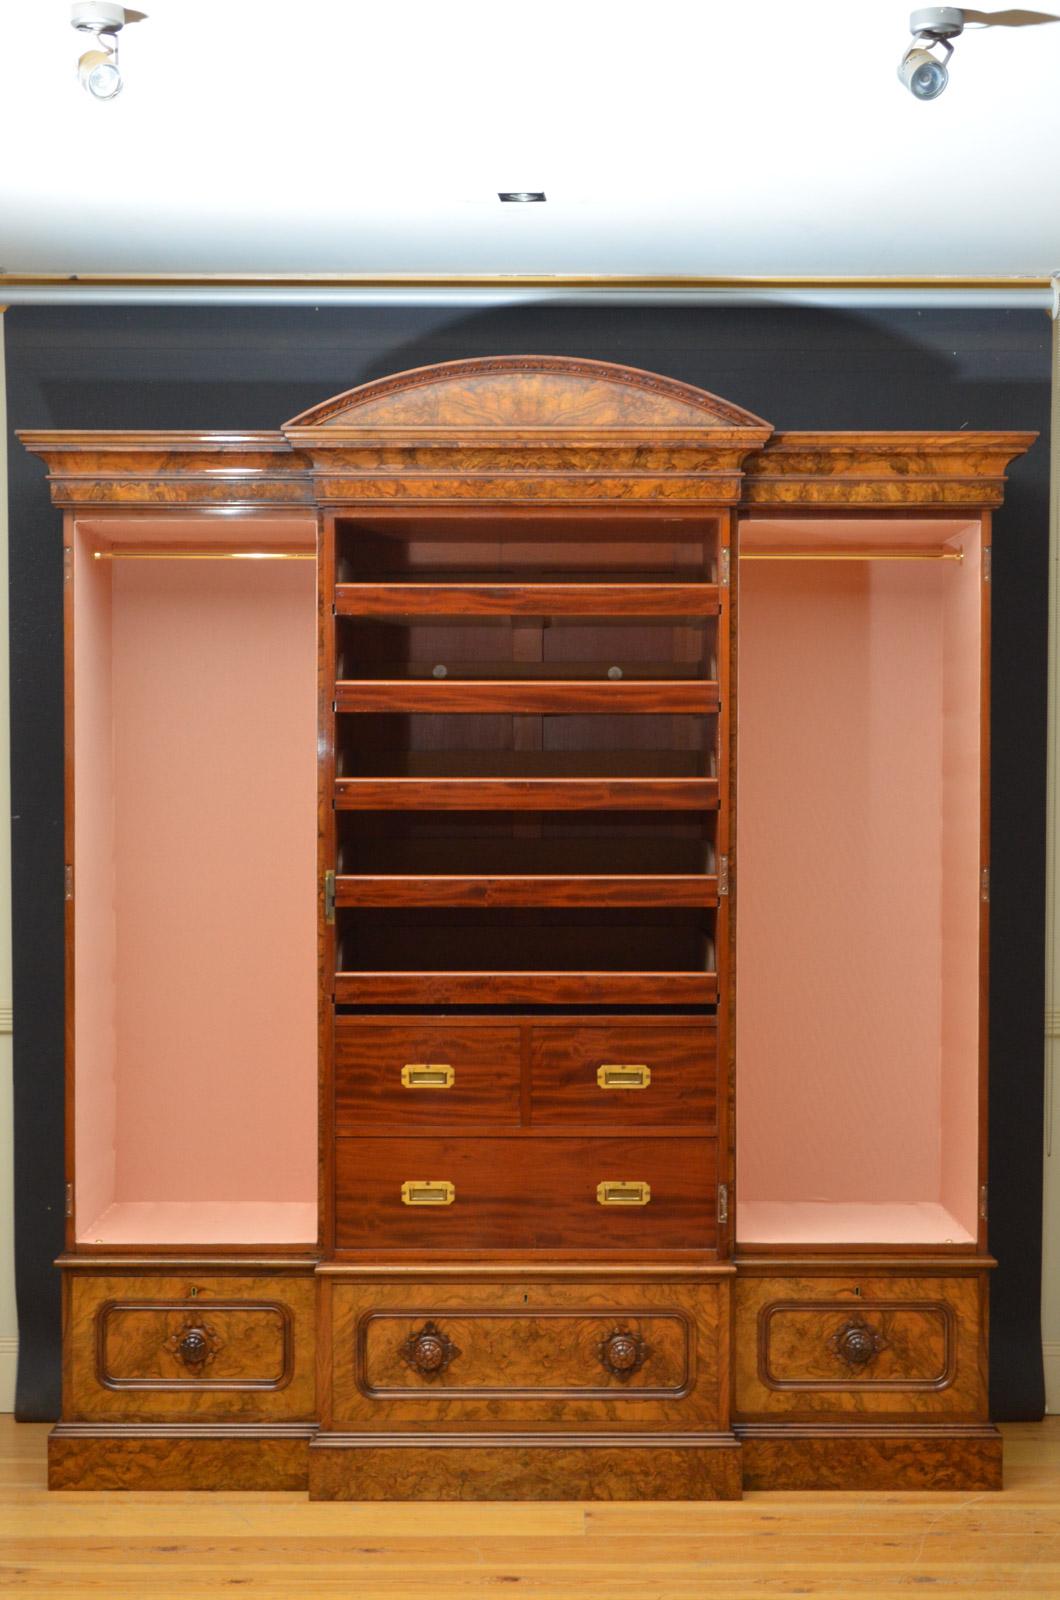 Sn4387, exceptional Victorian, three-door wardrobe in burr and figured walnut, having arched and flower carved pediment with molded cornice above projecting mirrored door with fine carved decoration to corners, flanked by paneled, arched cupboard